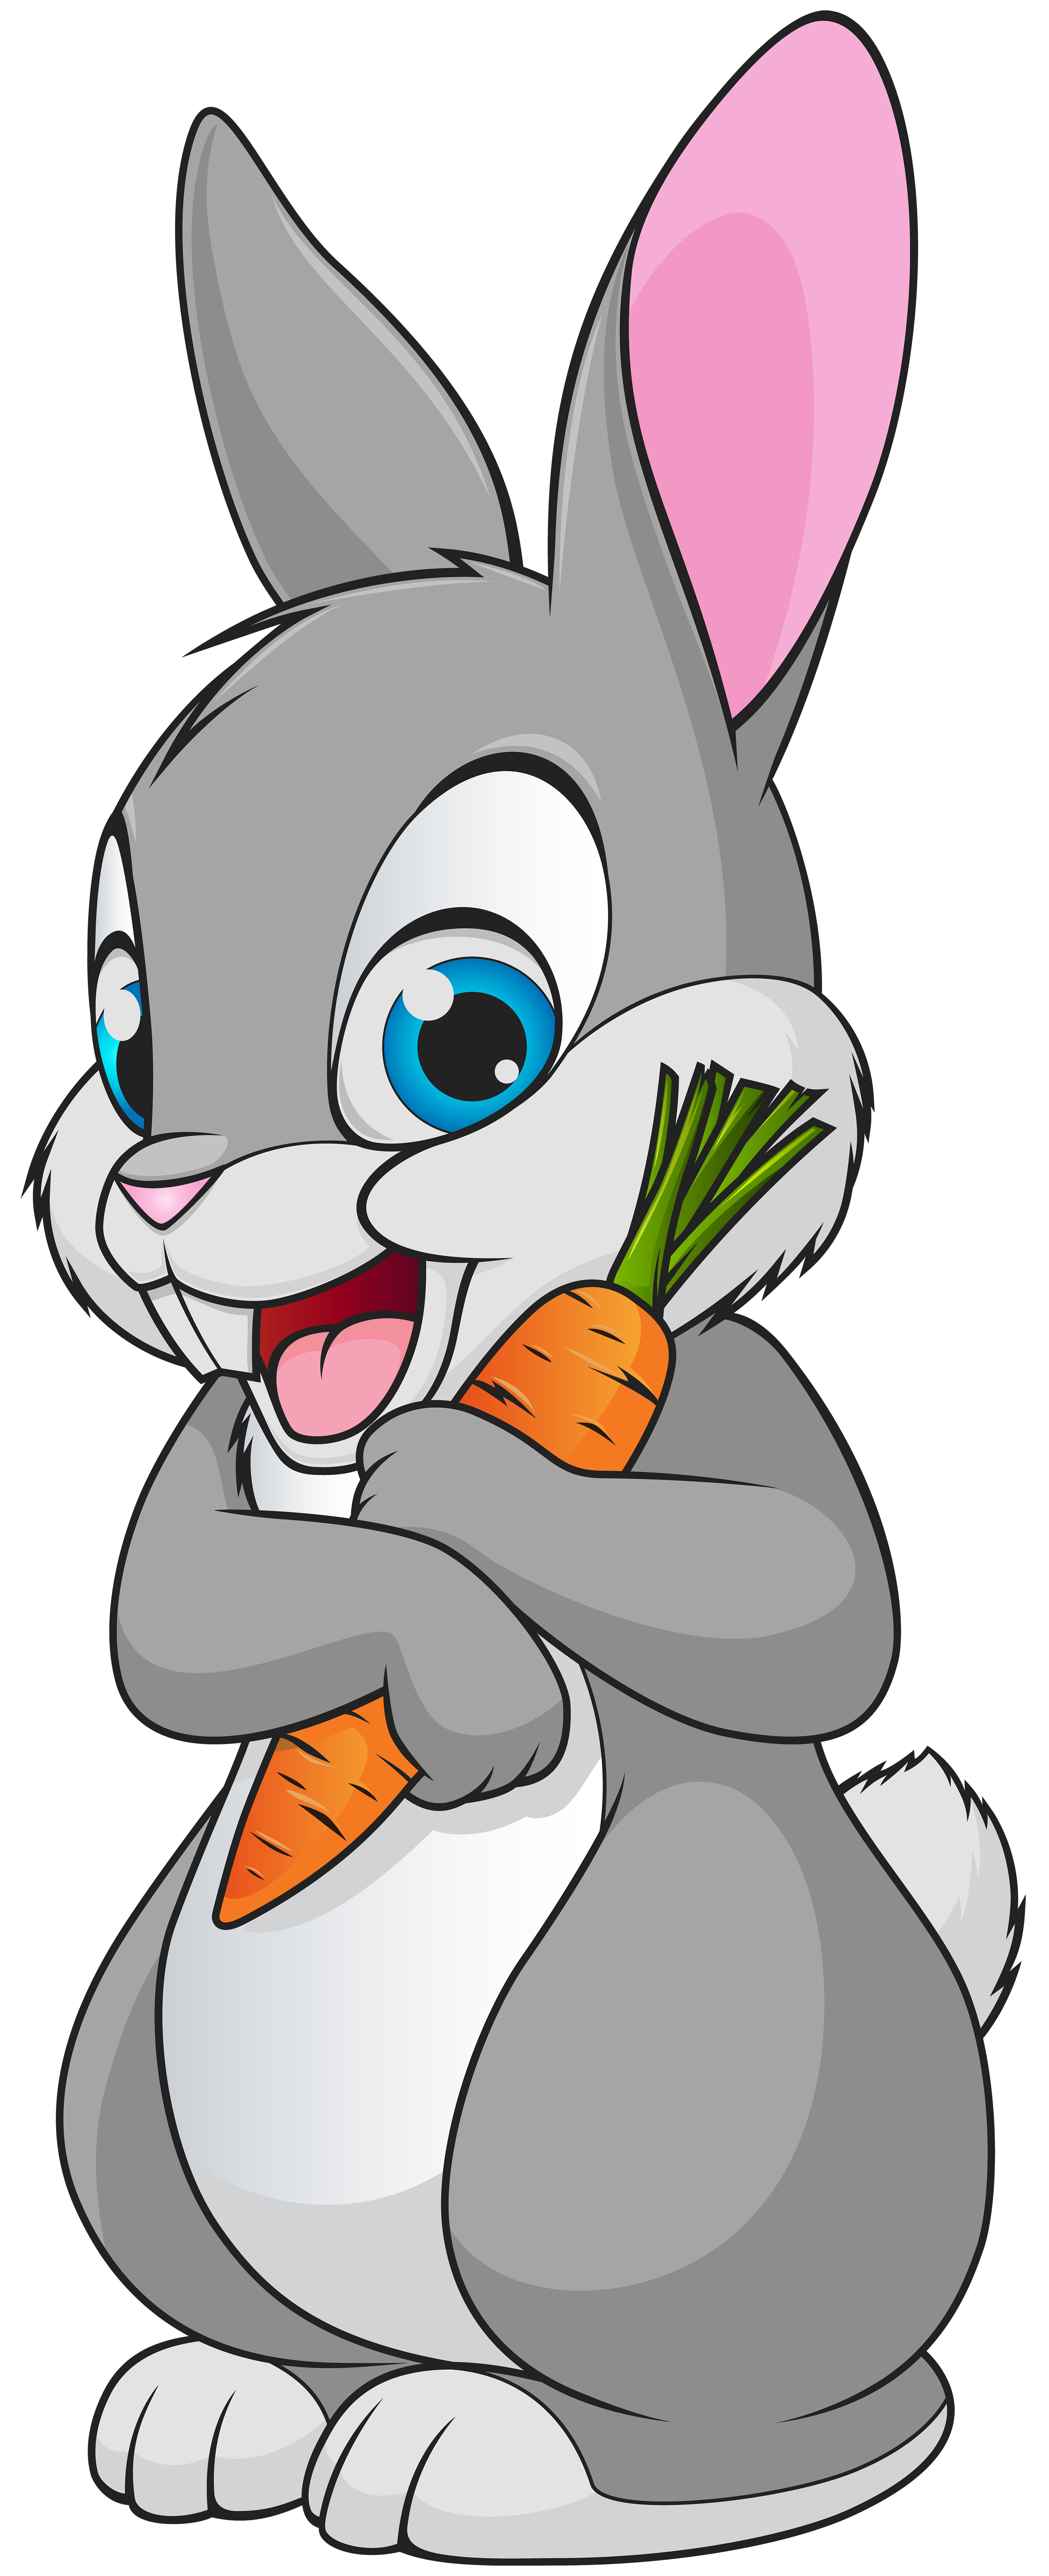 Bunny animated youtube draw. December clipart pet